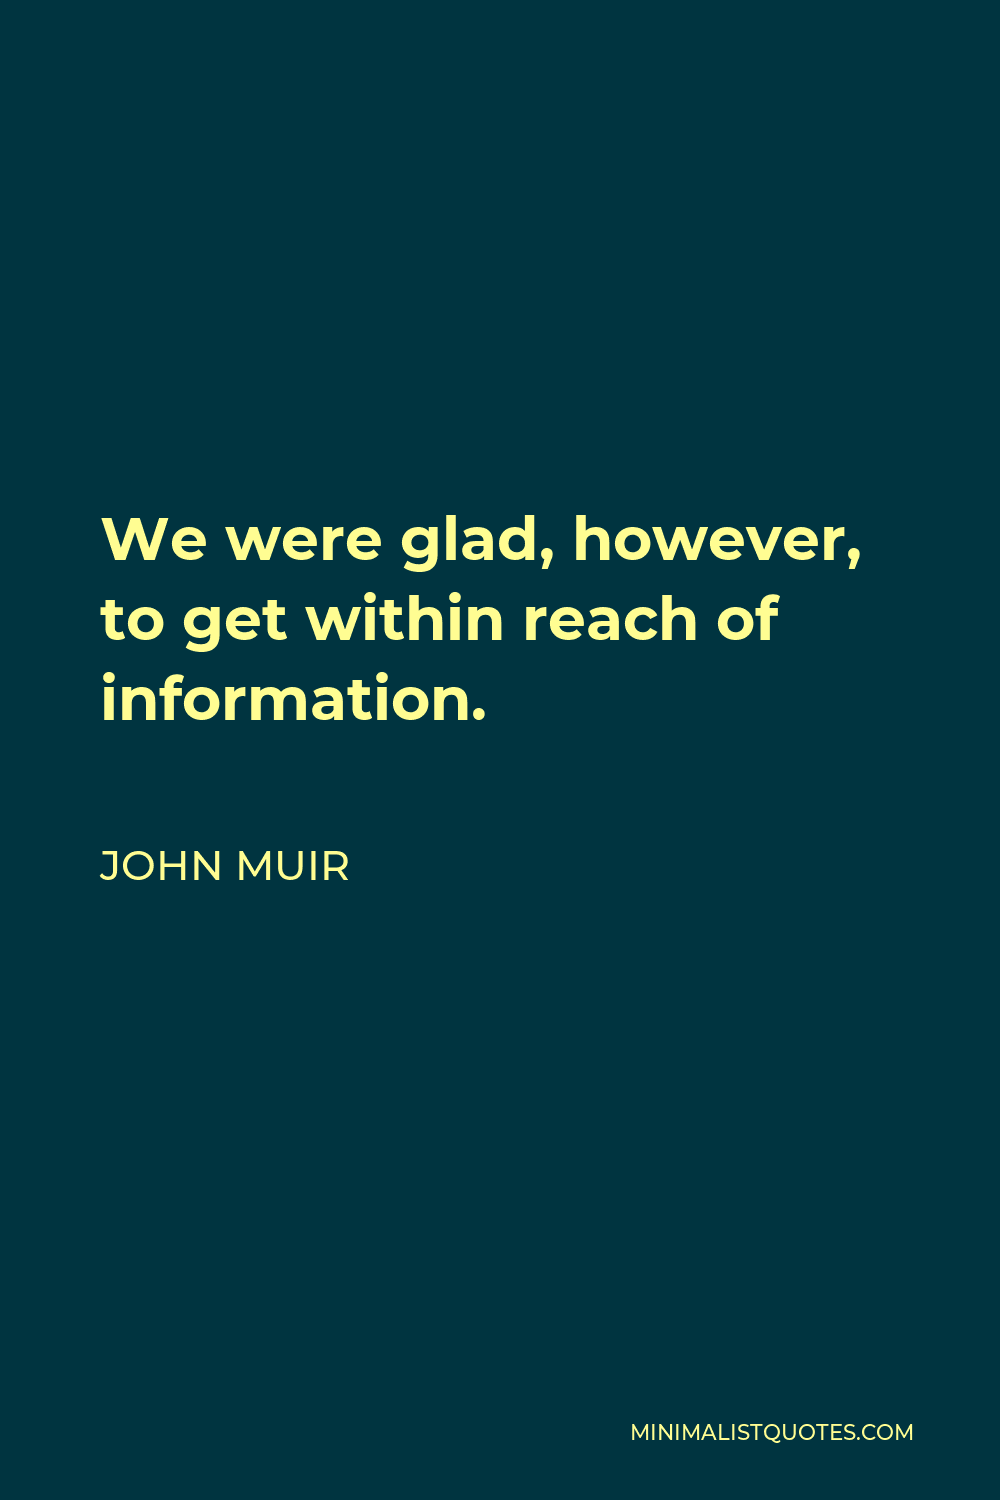 John Muir Quote - We were glad, however, to get within reach of information.